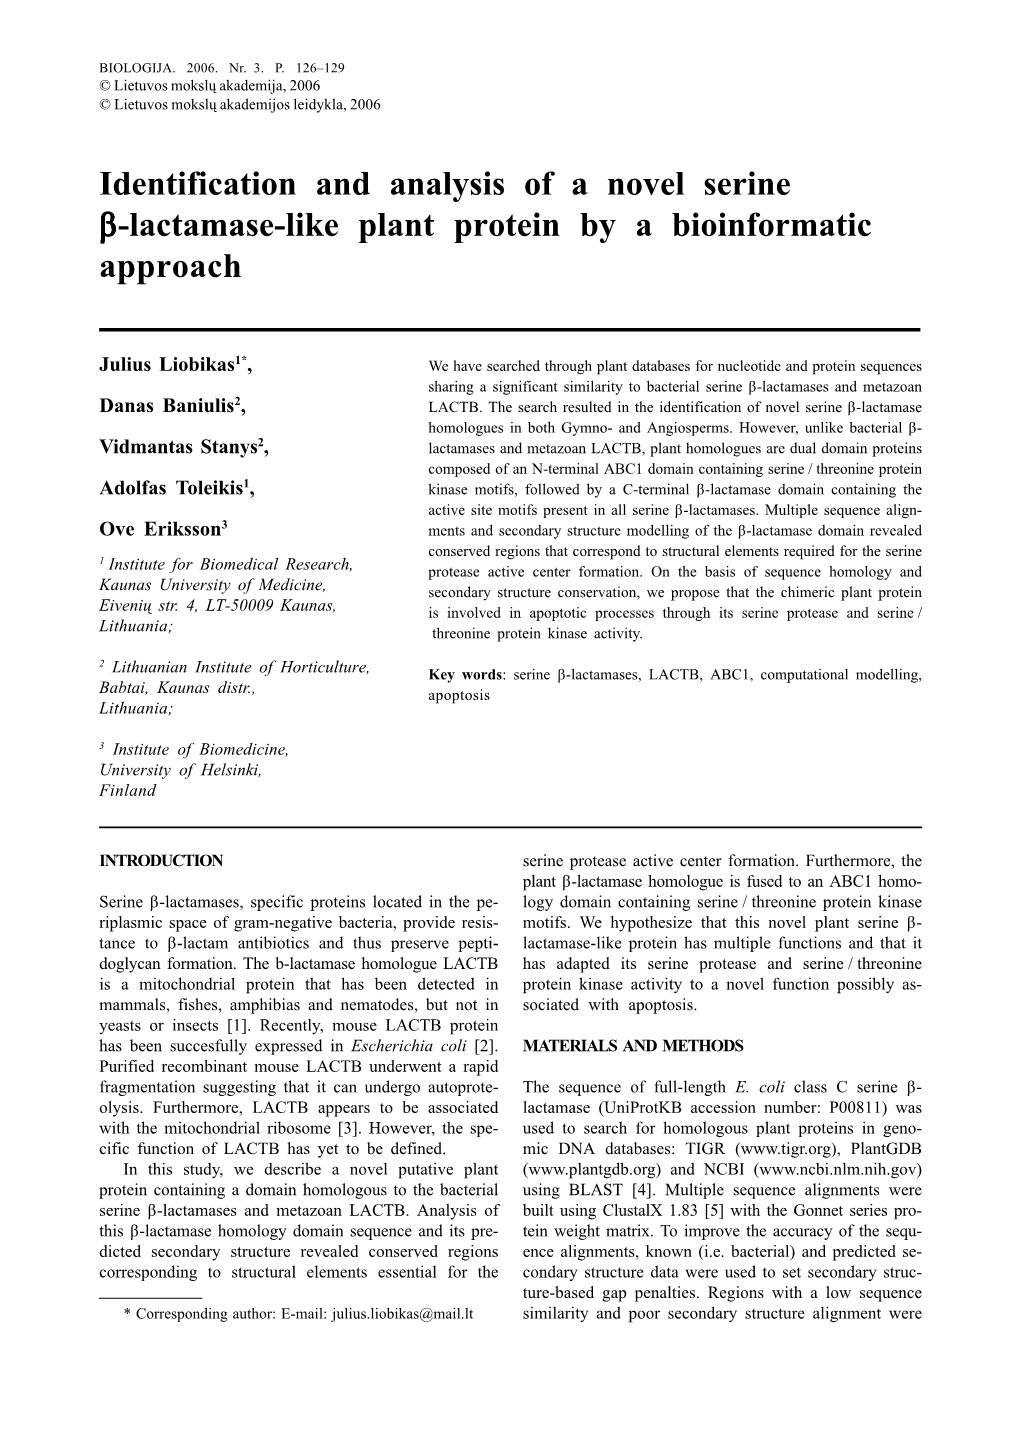 Identification and Analysis of a Novel Serine Β-Lactamase-Like Plant Protein by a Bioinformatic Approach